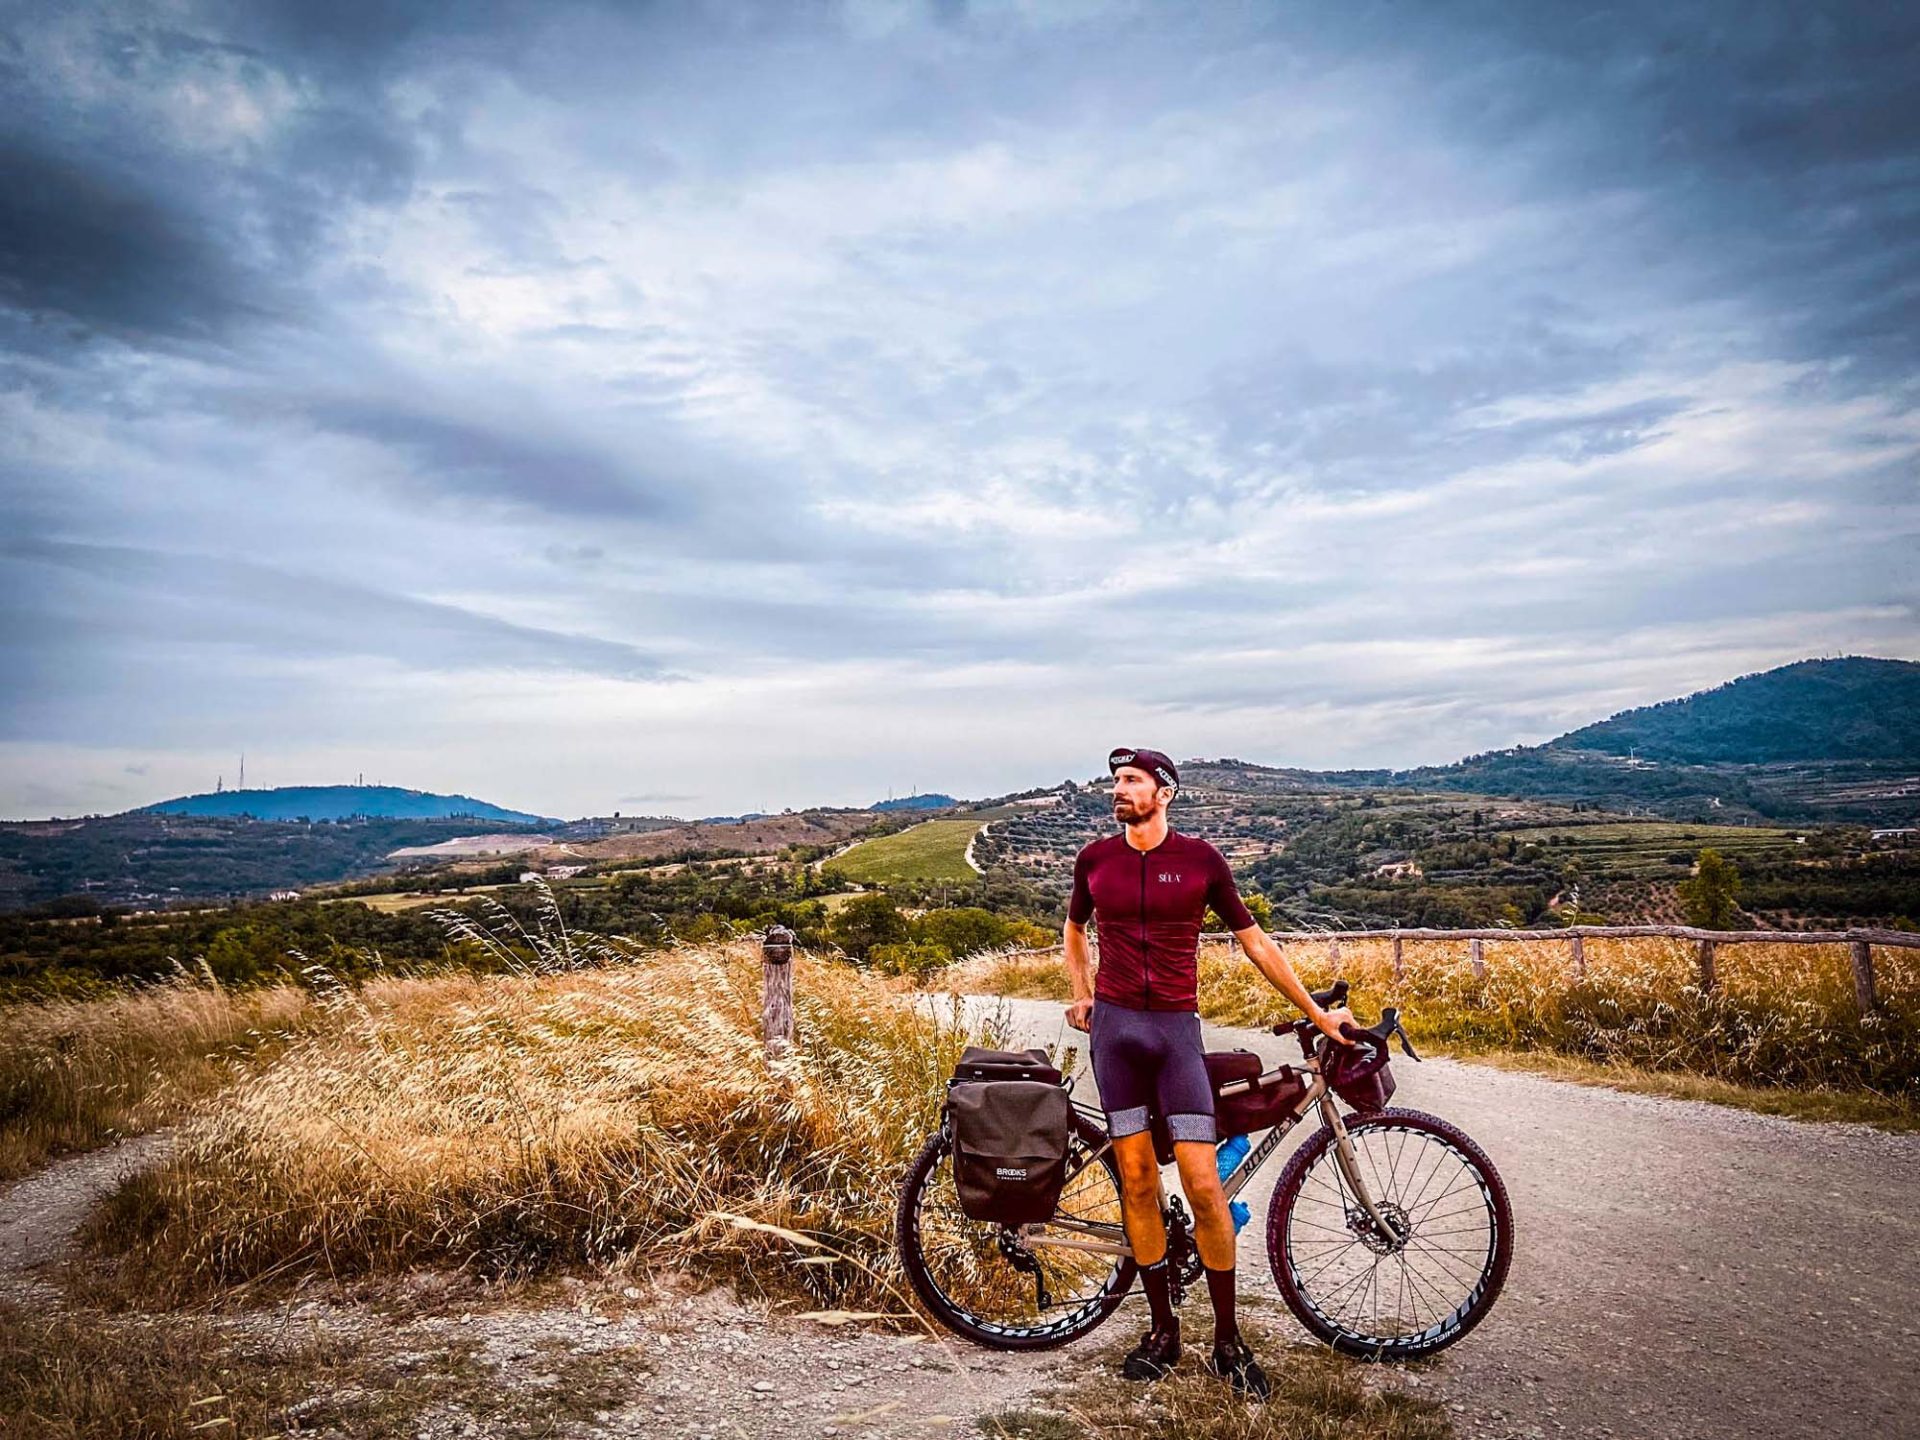 Lazzarin poses with his bike in front of a hilly, Italian town. 